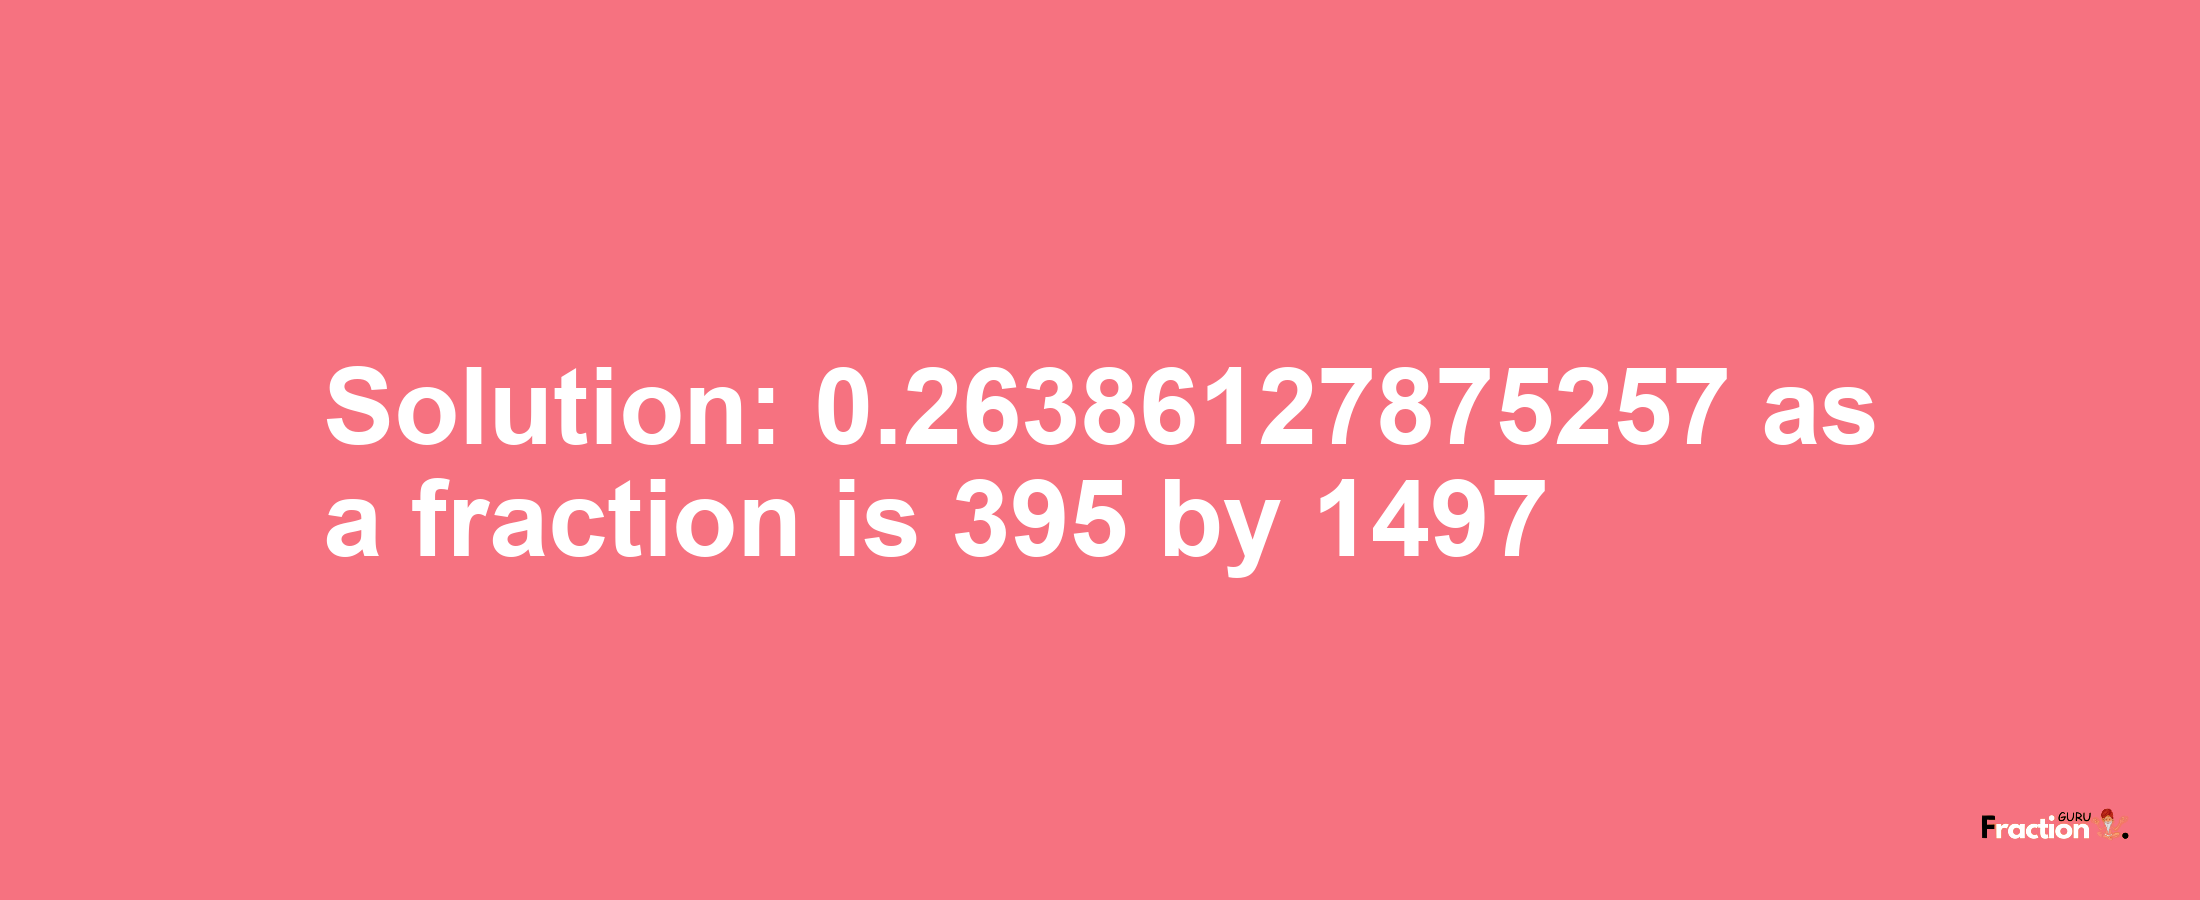 Solution:0.26386127875257 as a fraction is 395/1497